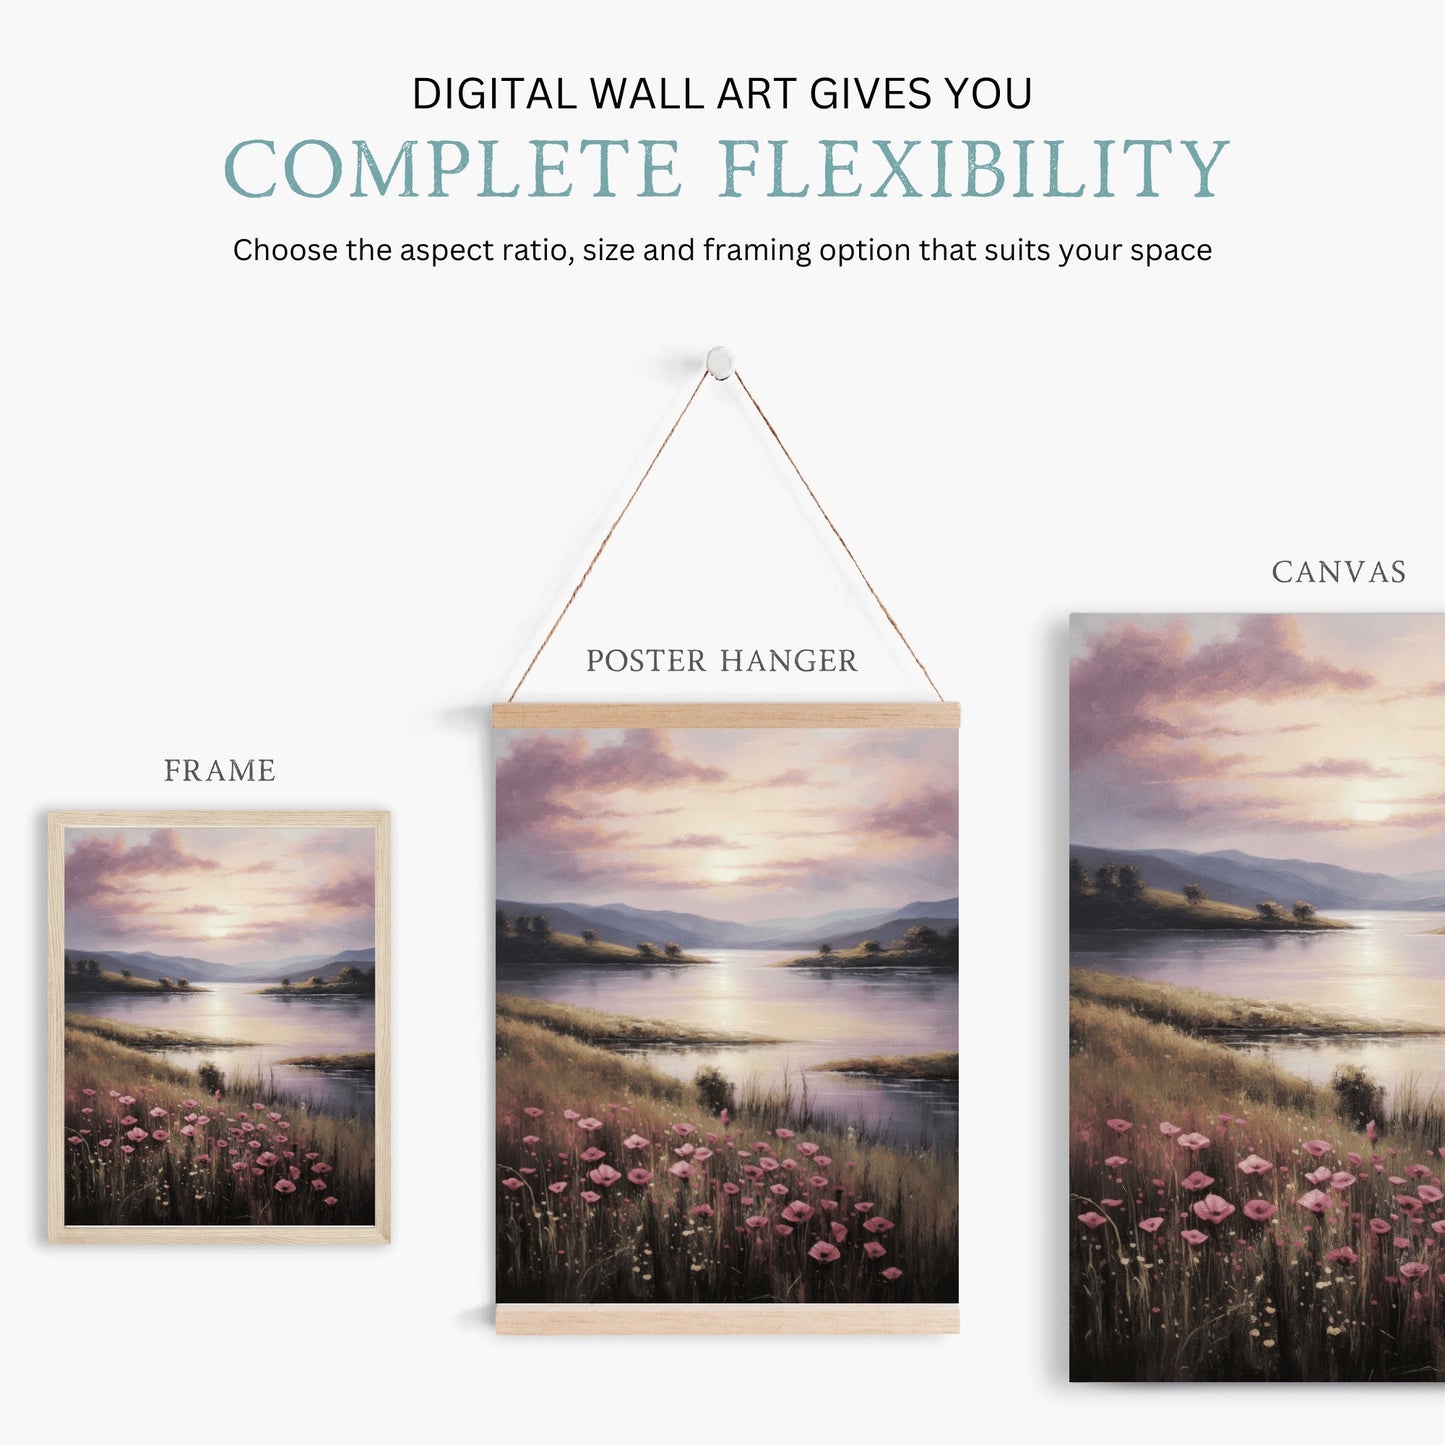 Floral & Mountain Majesty - Ultimate Digital Art for Nature Lovers: Versatile Sizes, Instant Download!